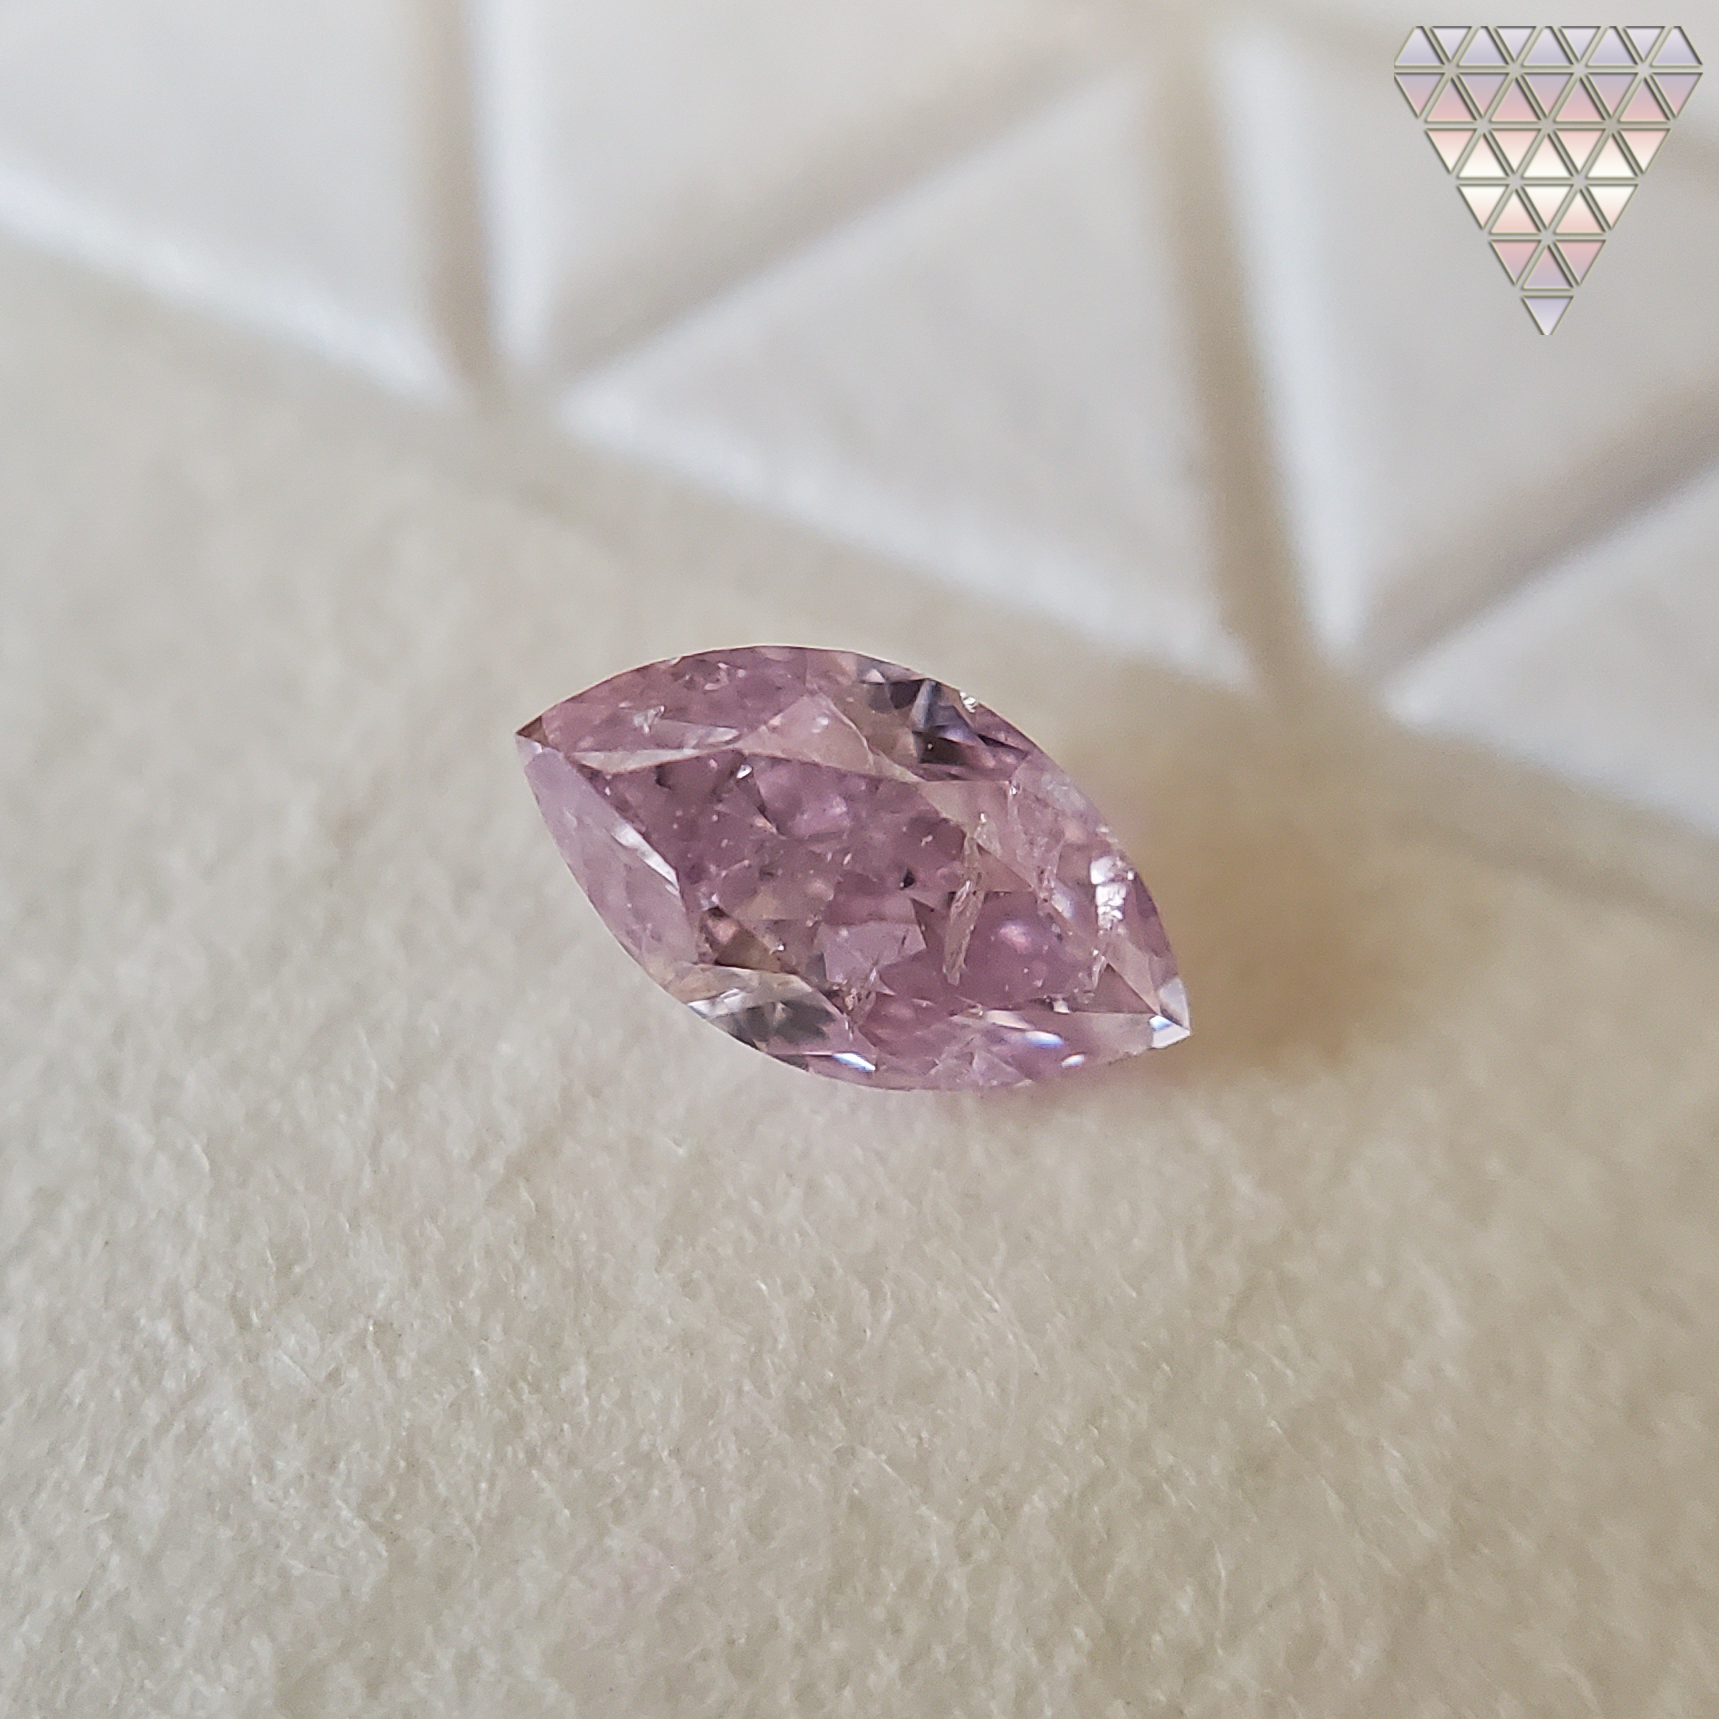 0.114 Ct Fancy Purple Pink I2 Marquise AGT Japan Natural Loose Diamond Exchange Federation